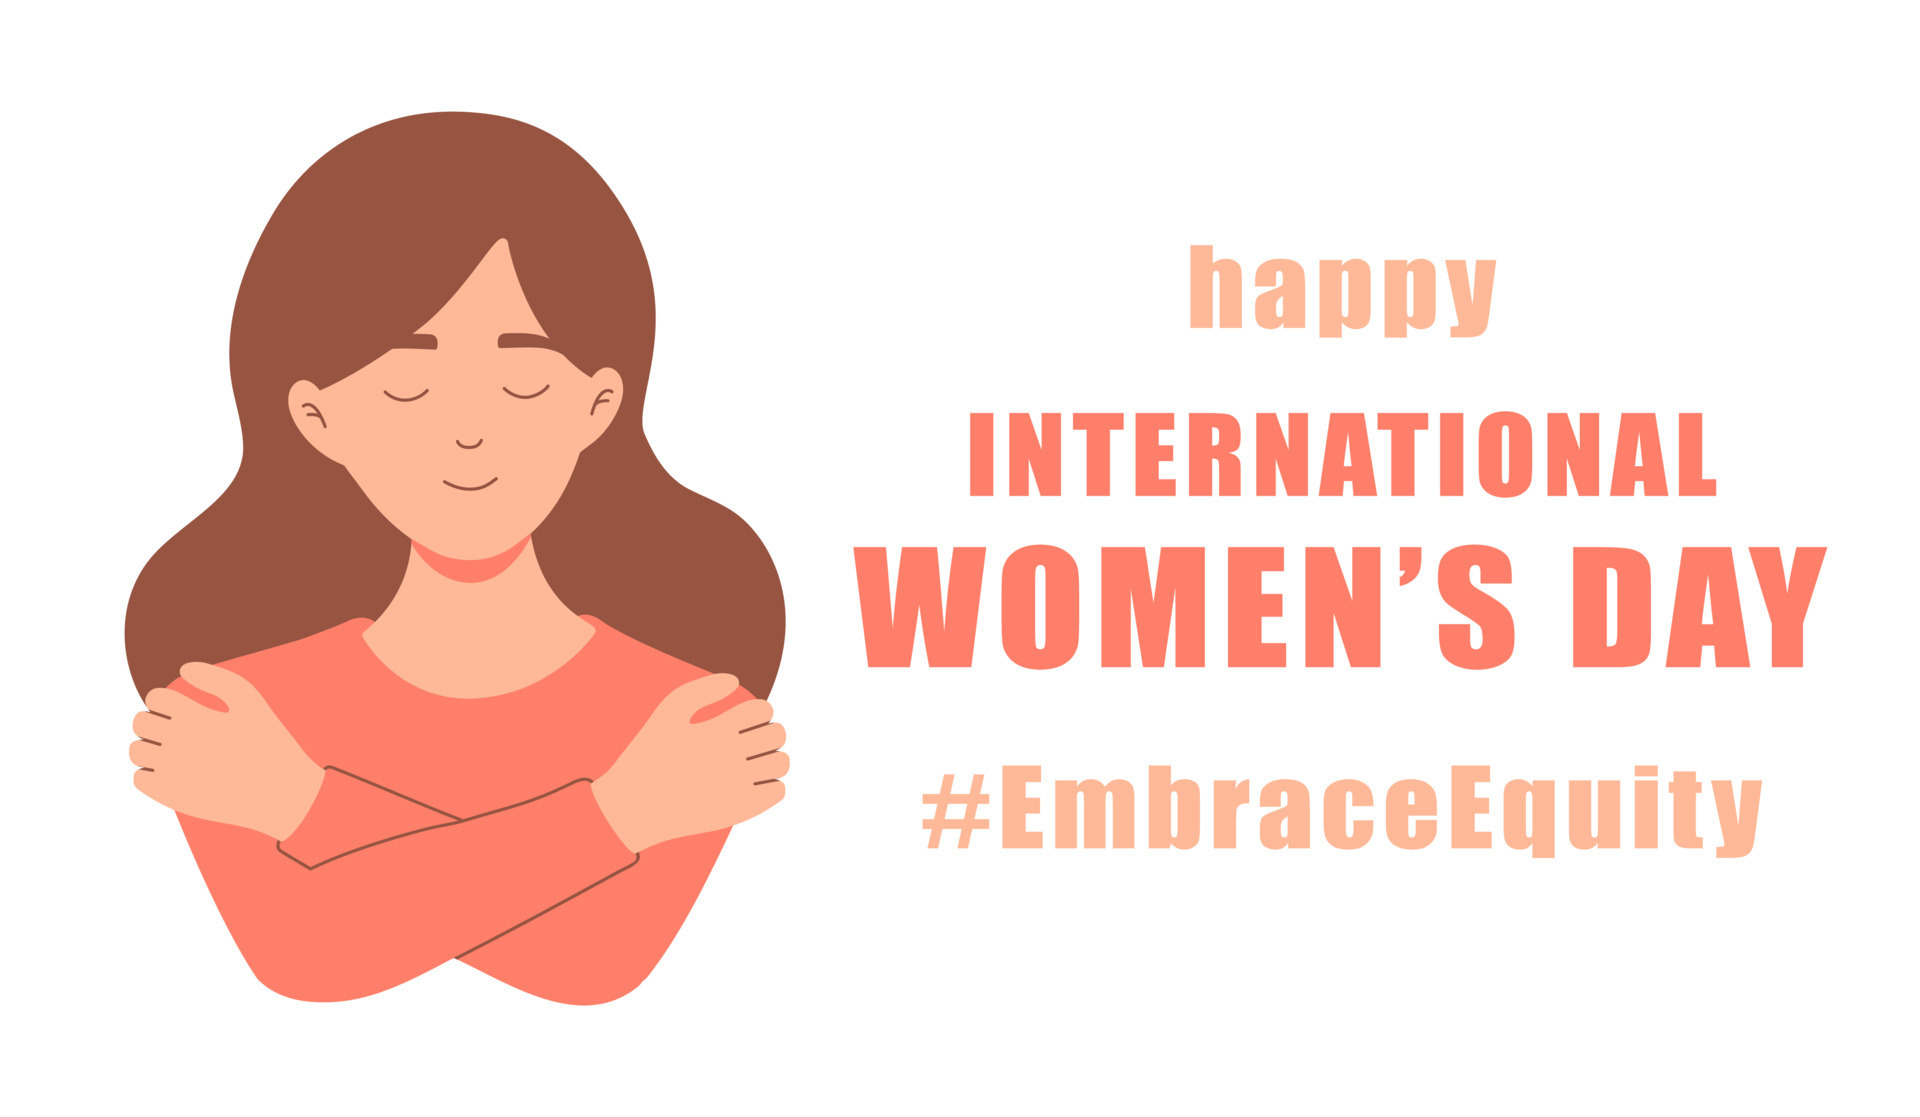 https://static.vecteezy.com/system/resources/previews/017/069/008/original/international-womens-day-concept-poster-embrace-equity-woman-illustration-background-vector.jpg